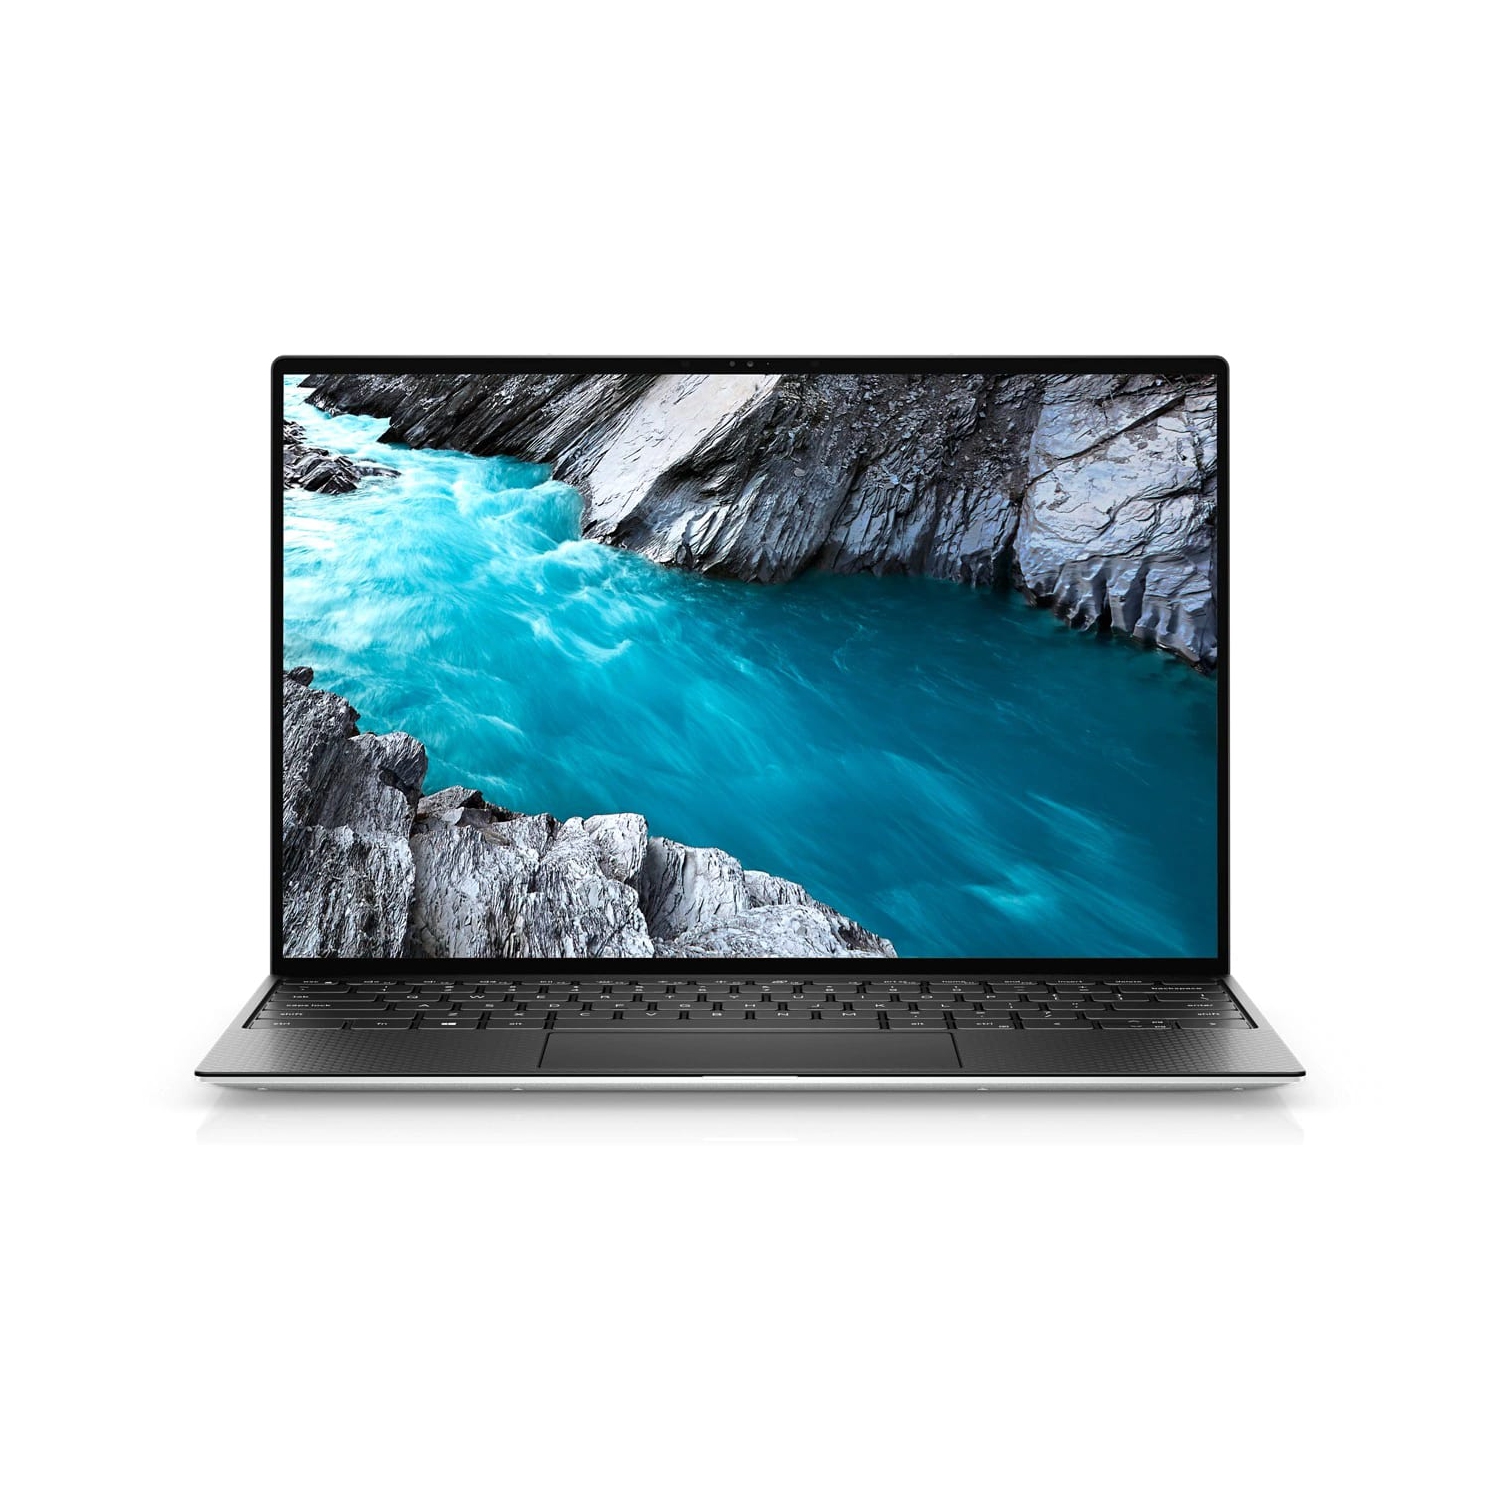 Refurbished (Excellent) - Dell XPS 13 9310 Laptop (2020) | 13.4" FHD+ | Core i7 - 2TB SSD - 32GB RAM | 4 Cores @ 4.7 GHz - 11th Gen CPU Certified Refurbished